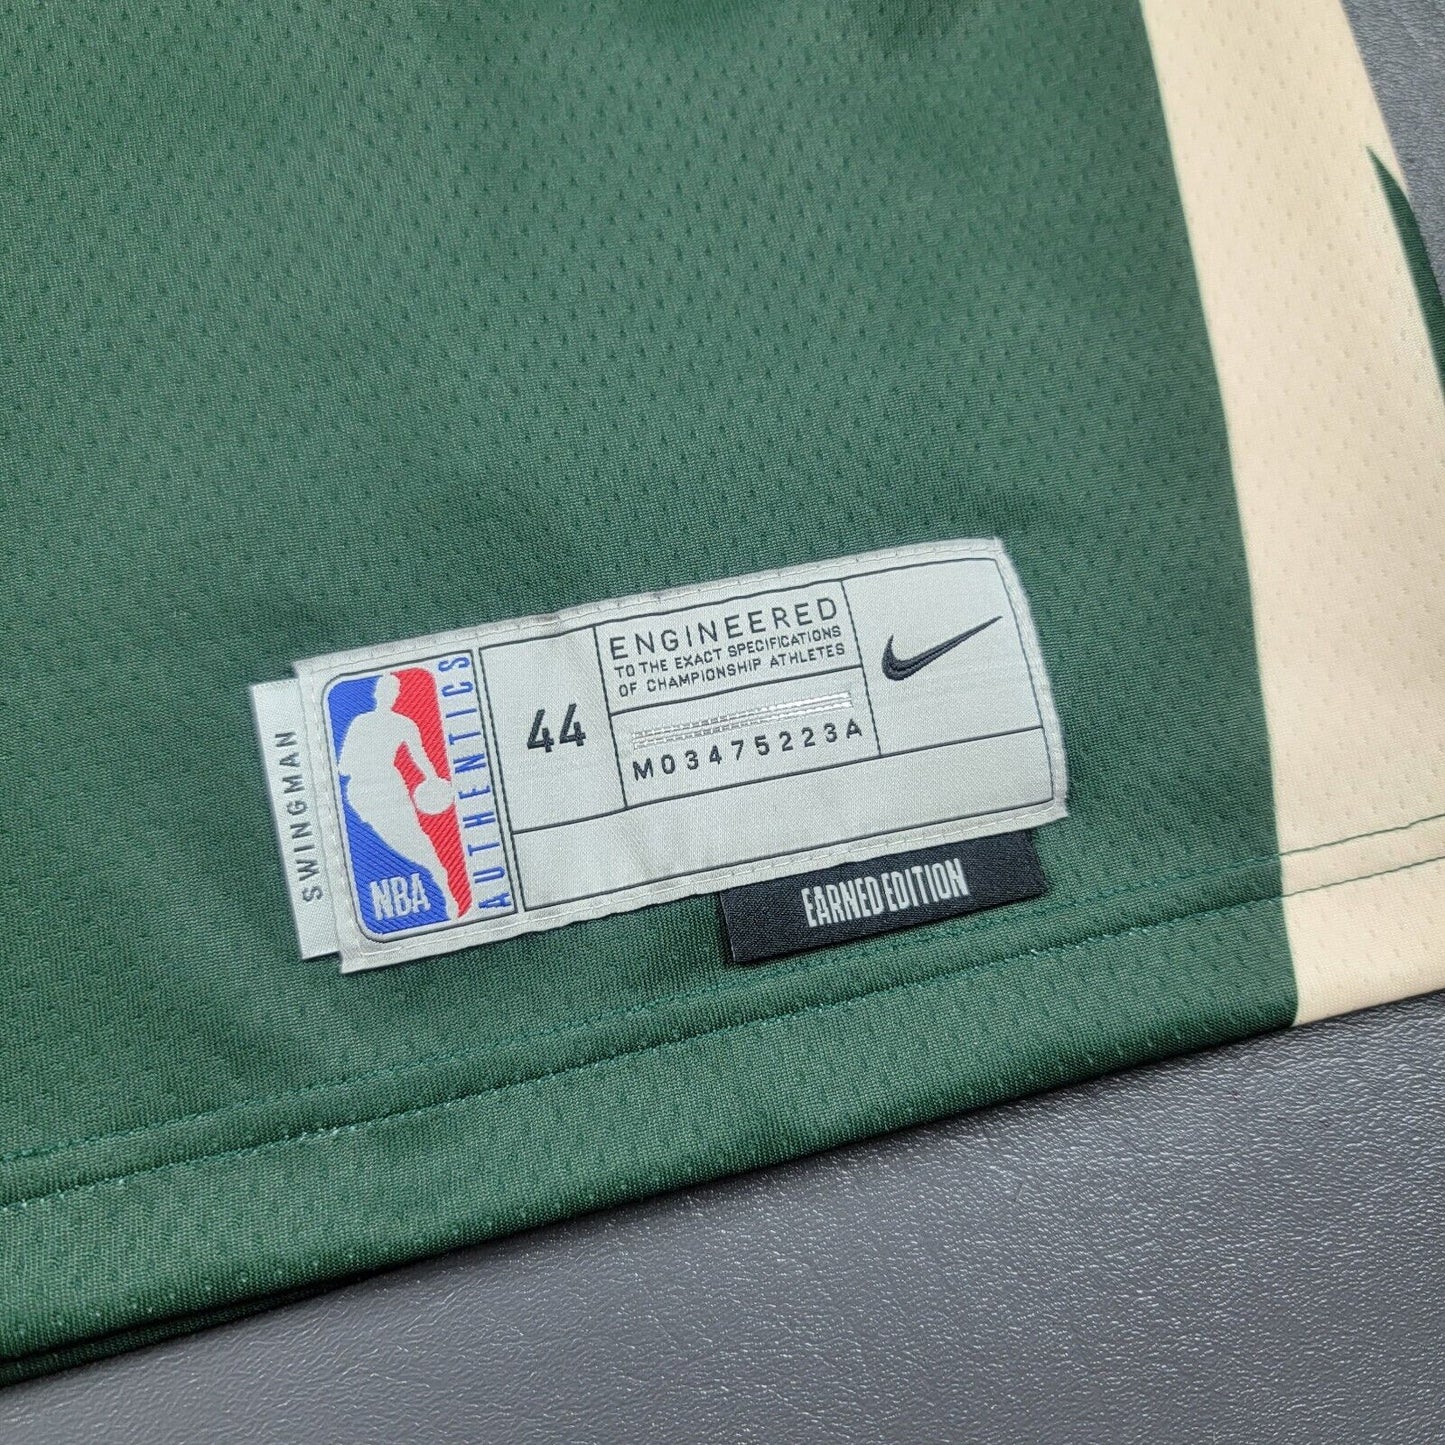 100% Authentic Giannis Antetokounmpo Nike Bucks Earned Edition Jersey Size 44 M